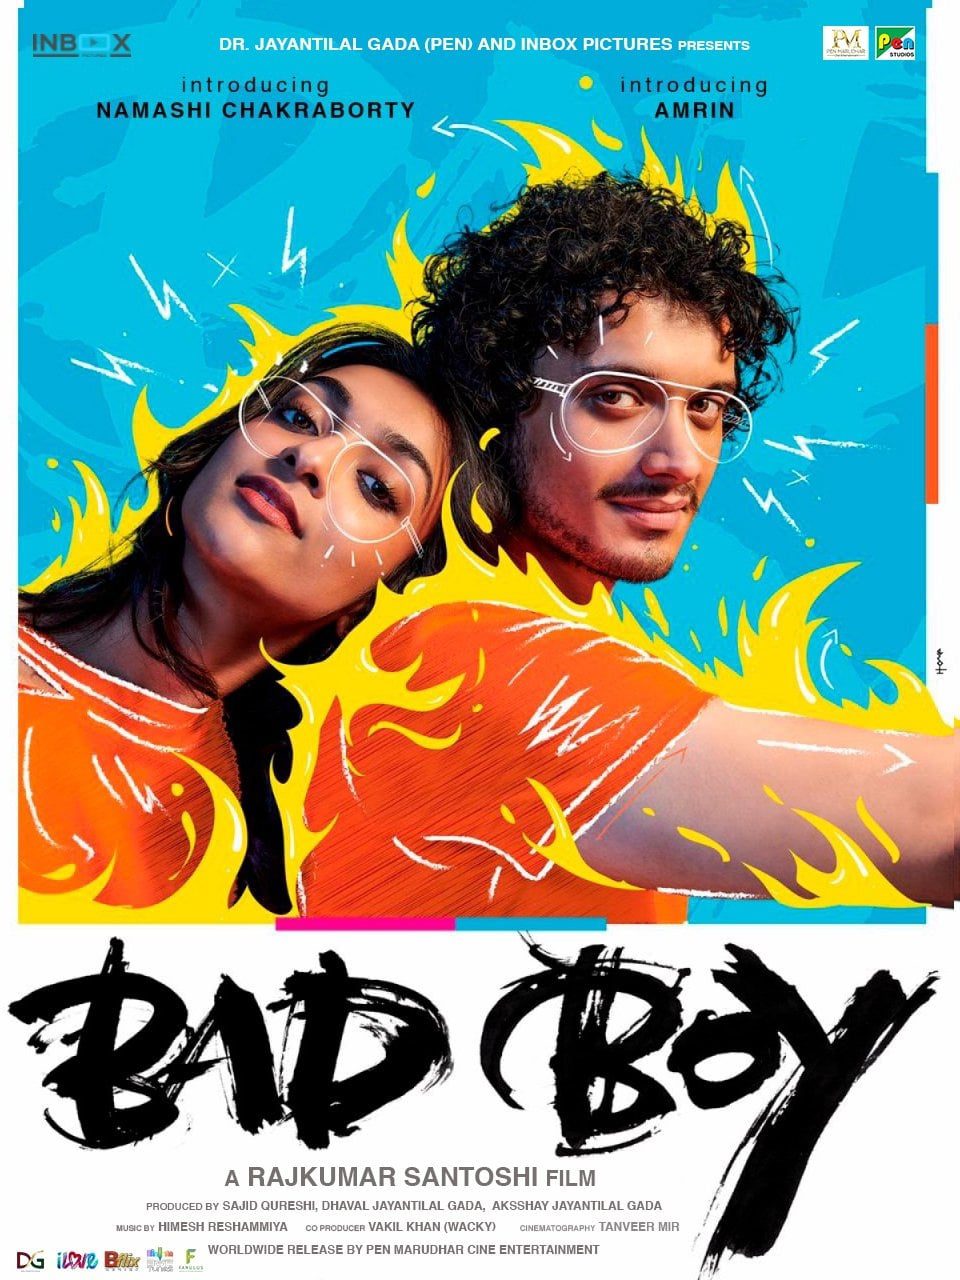 Poster for the movie "Bad Boy"